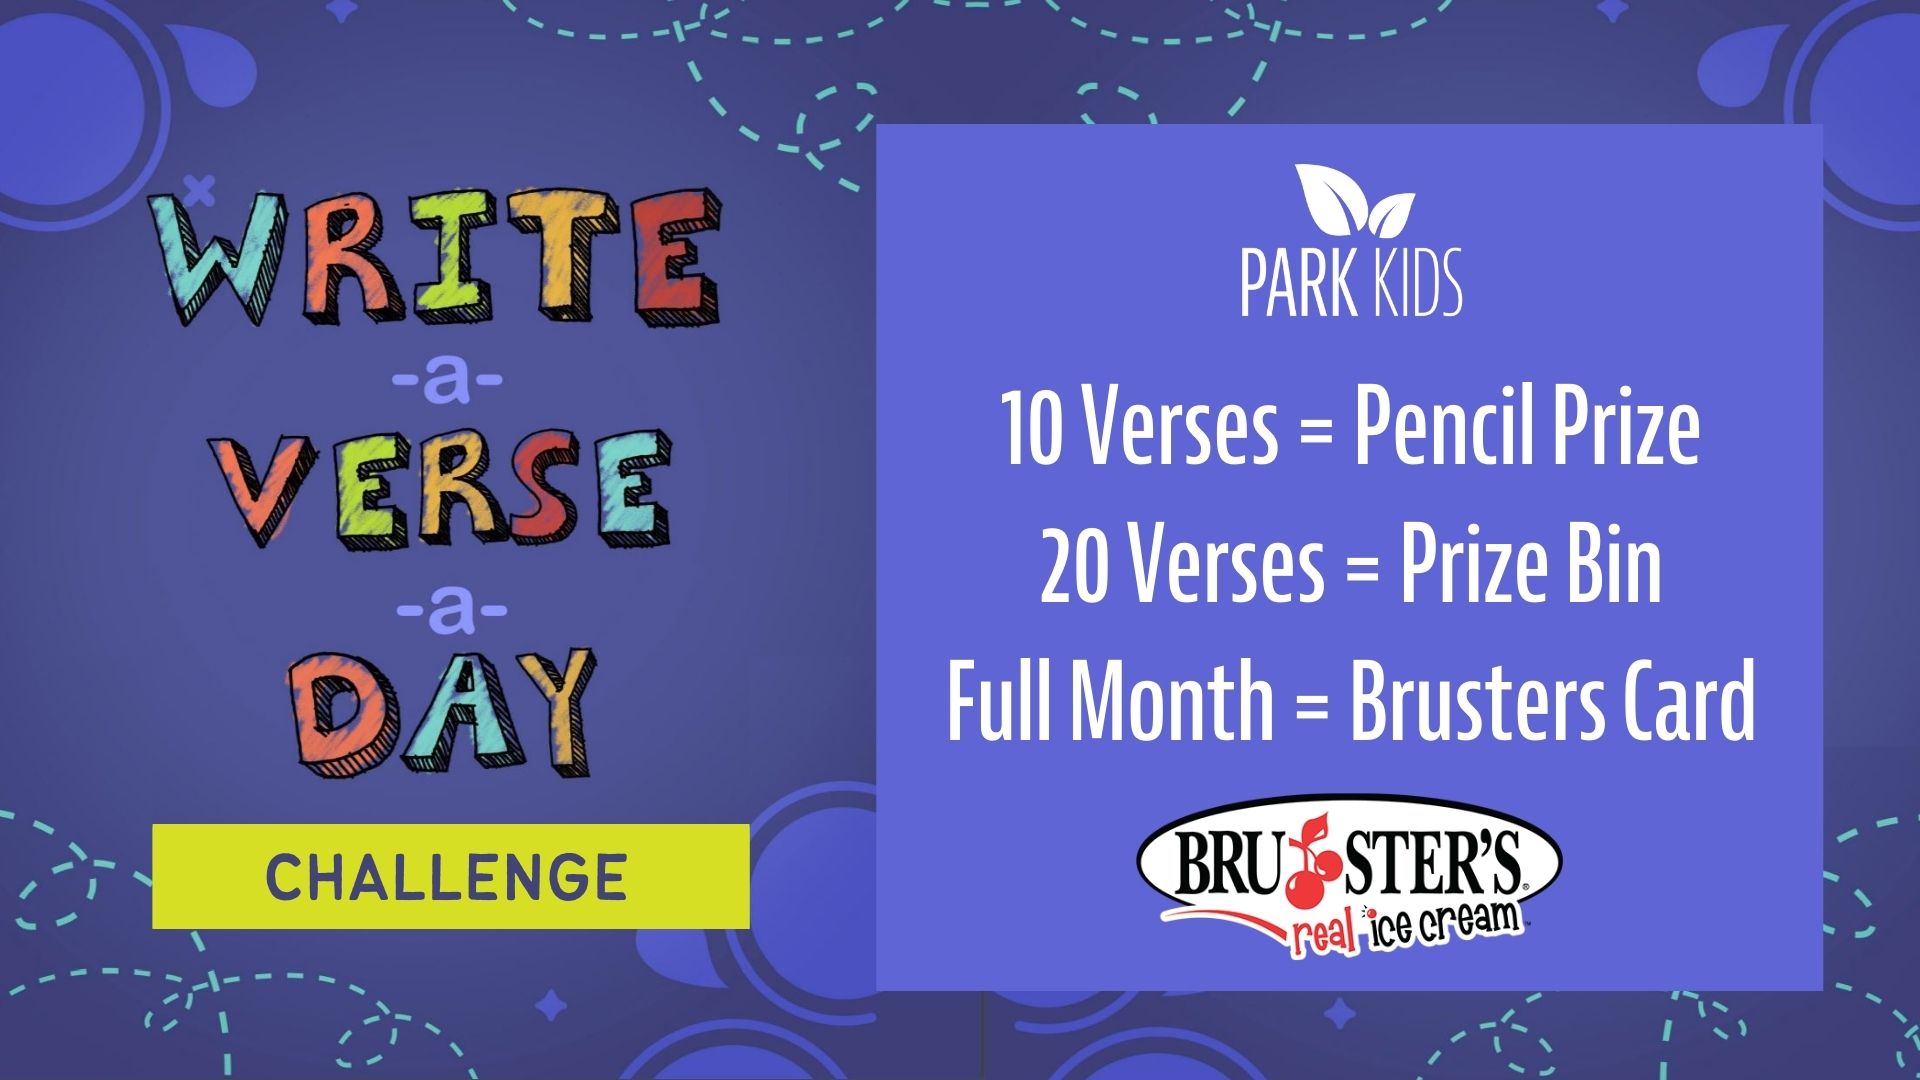 Write-A-Verse-A-Day Challenge Park Kids with Bruster's Real Ice Cream logo